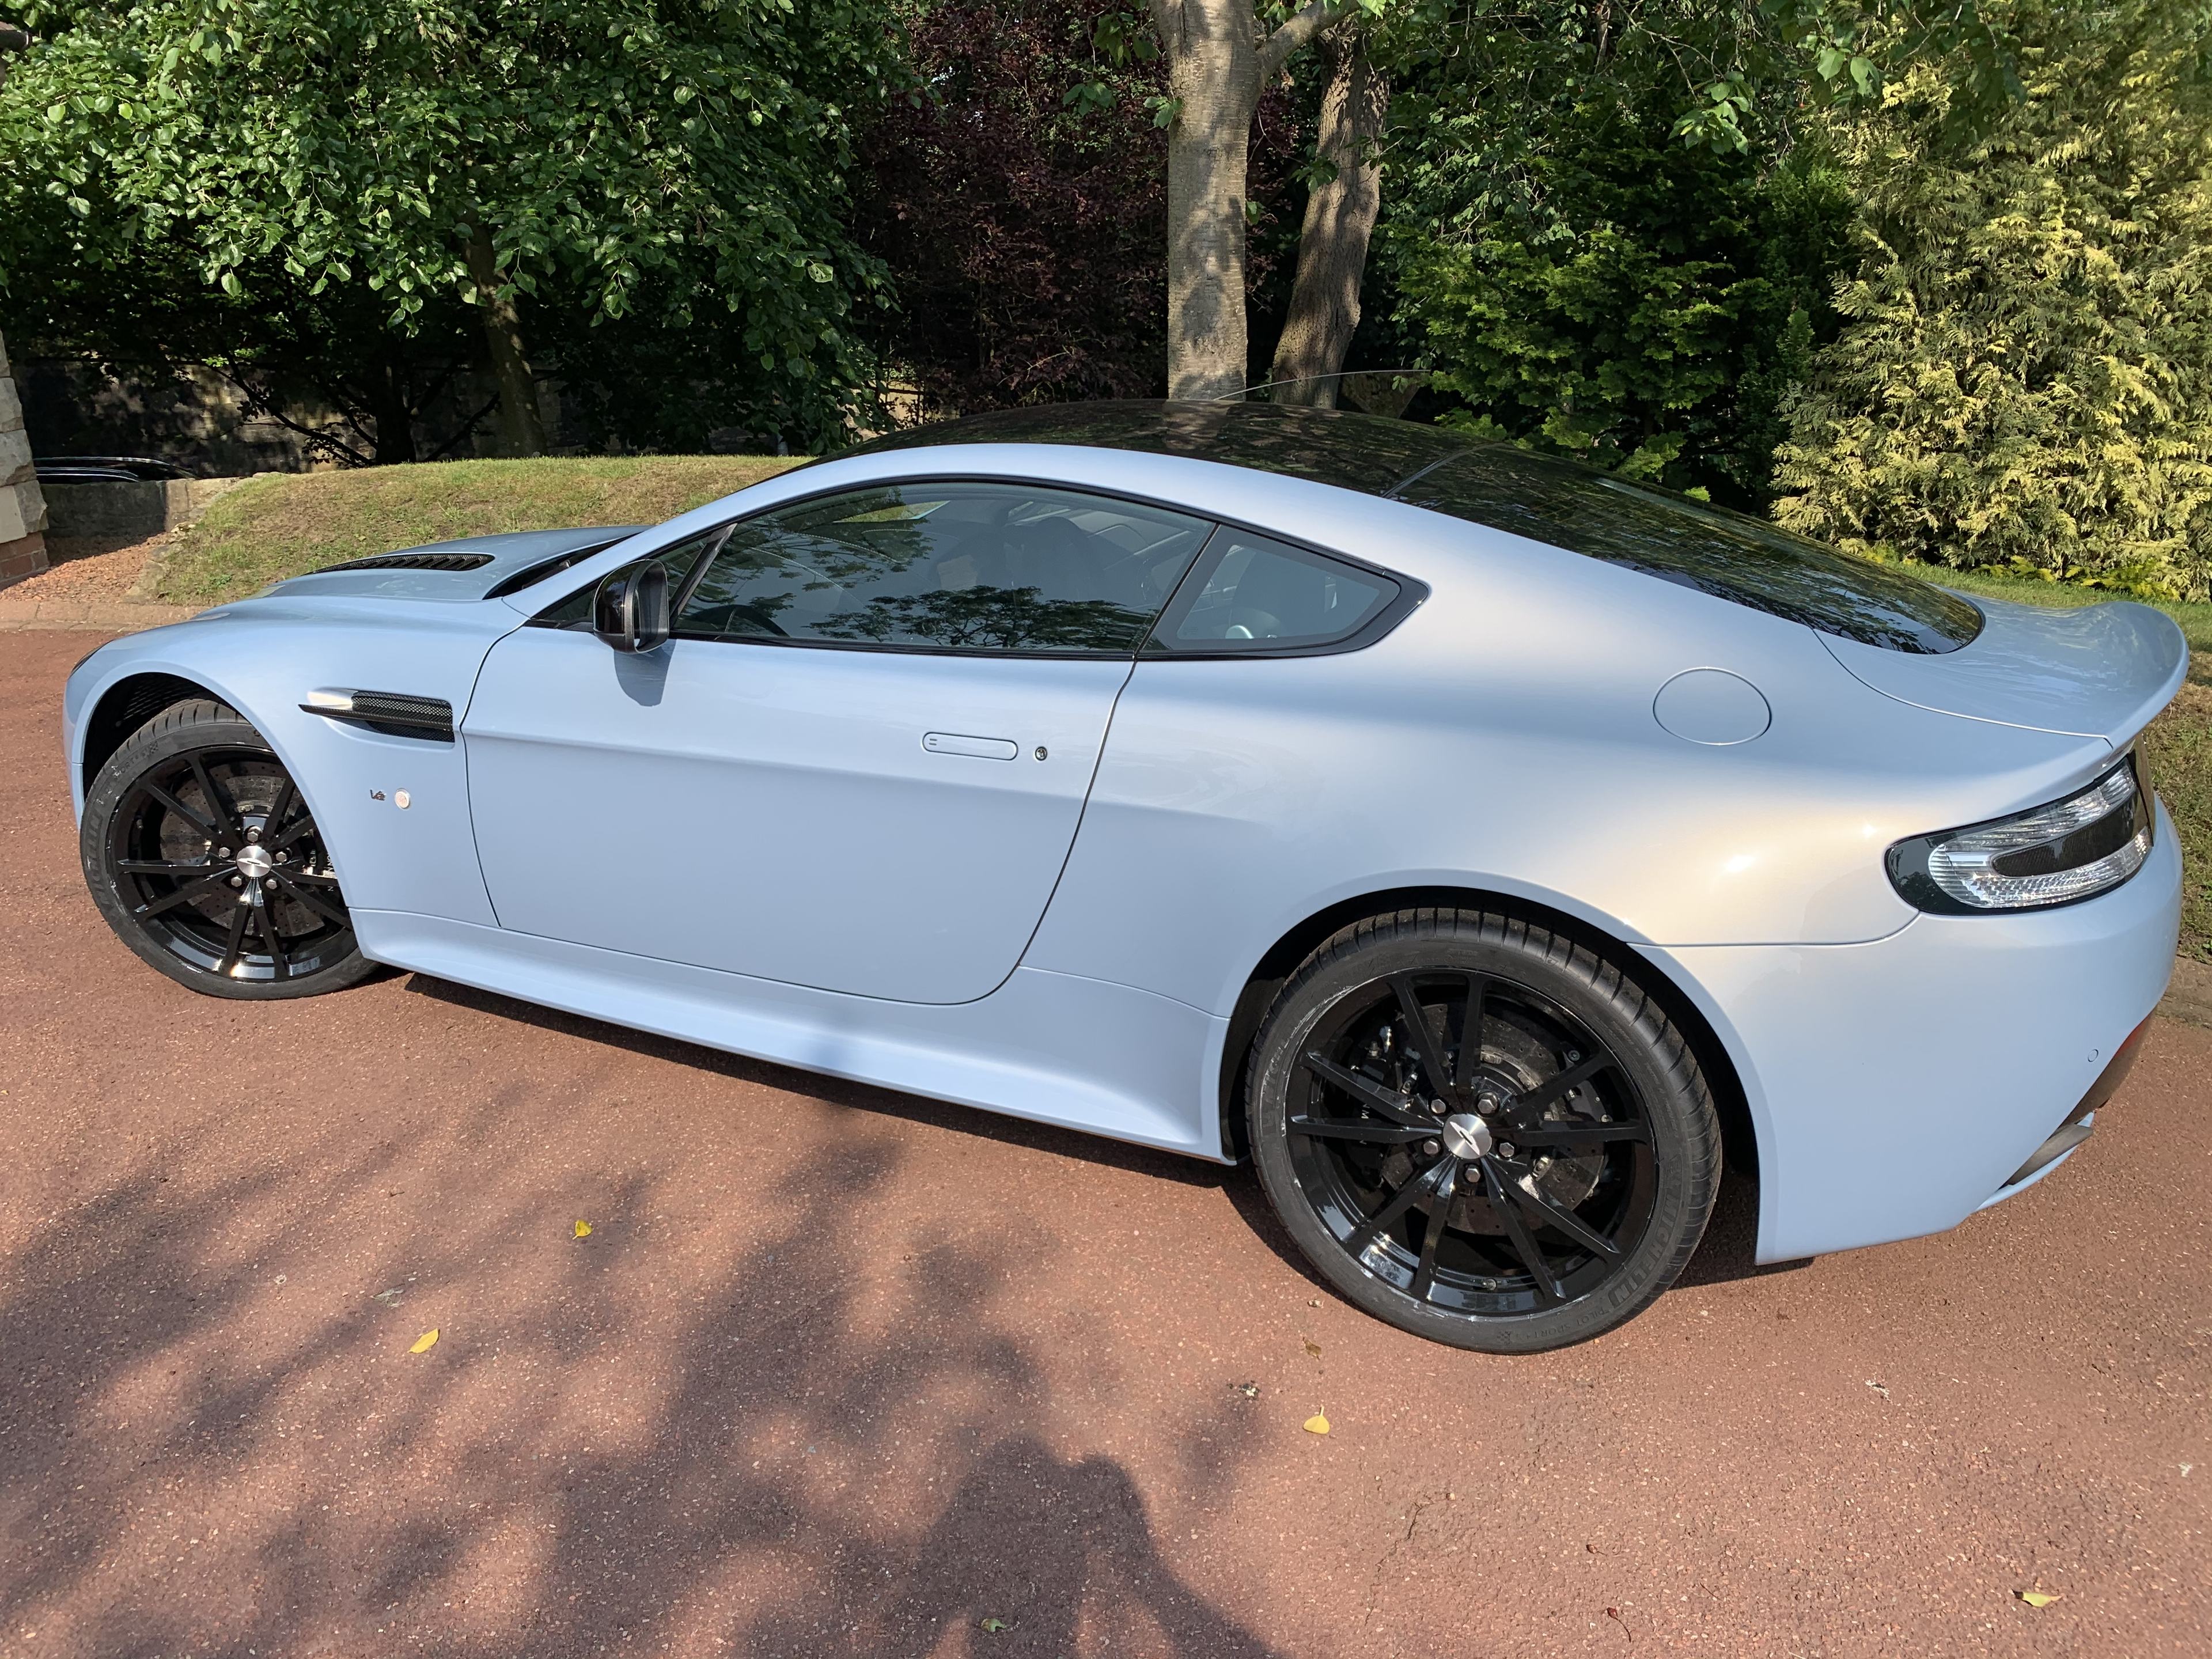 So what have you done with your Aston today? (Vol. 2) - Page 36 - Aston Martin - PistonHeads